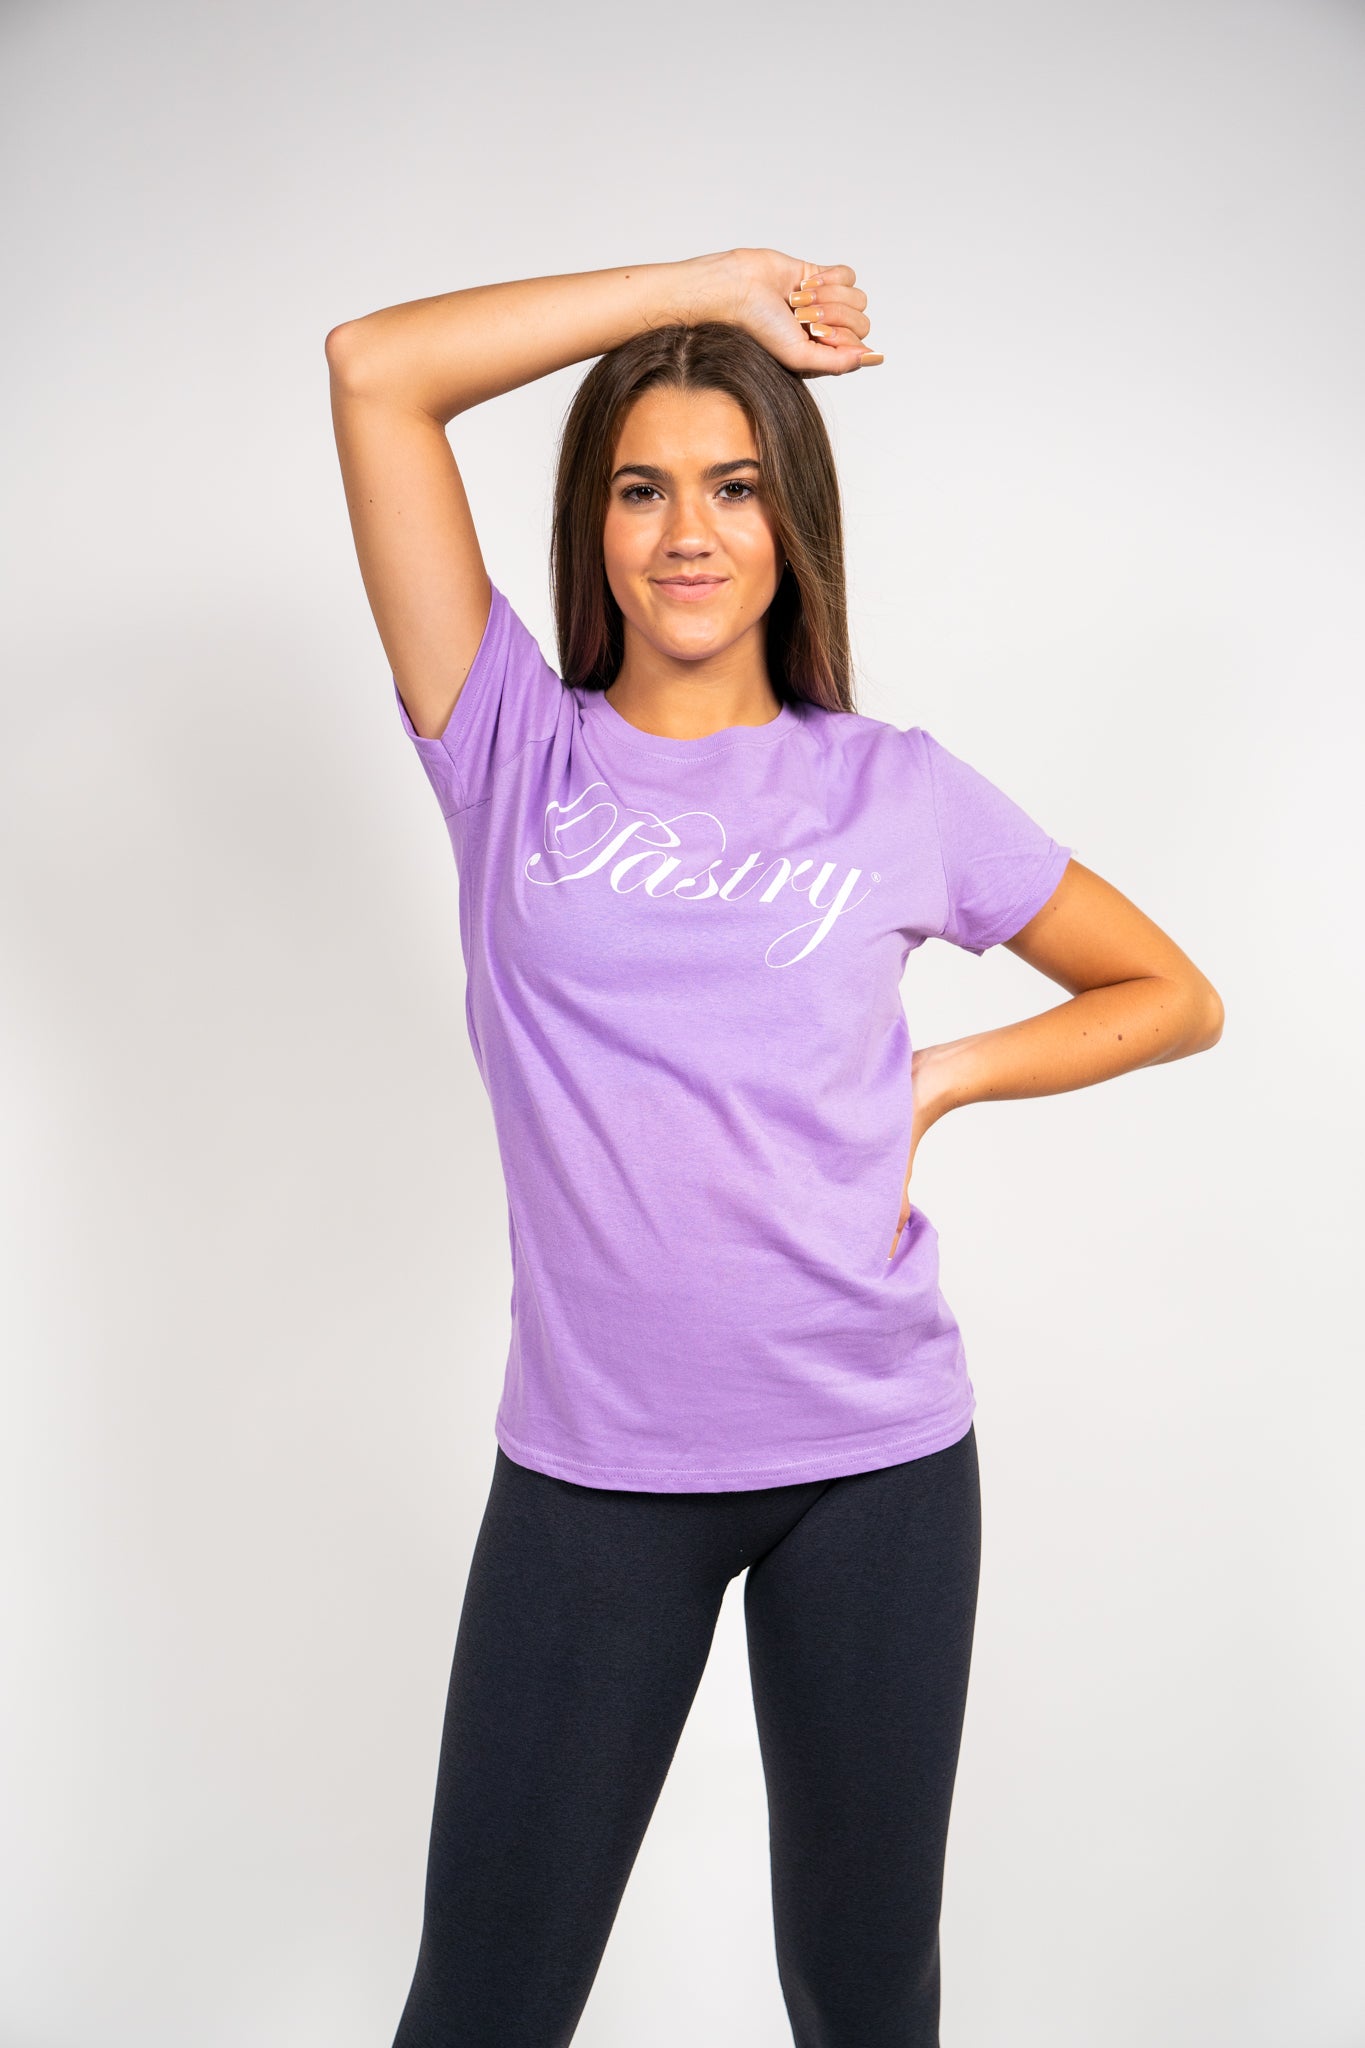 Pastry Tee Shirt Lavender with White Sparkle Logo when worn